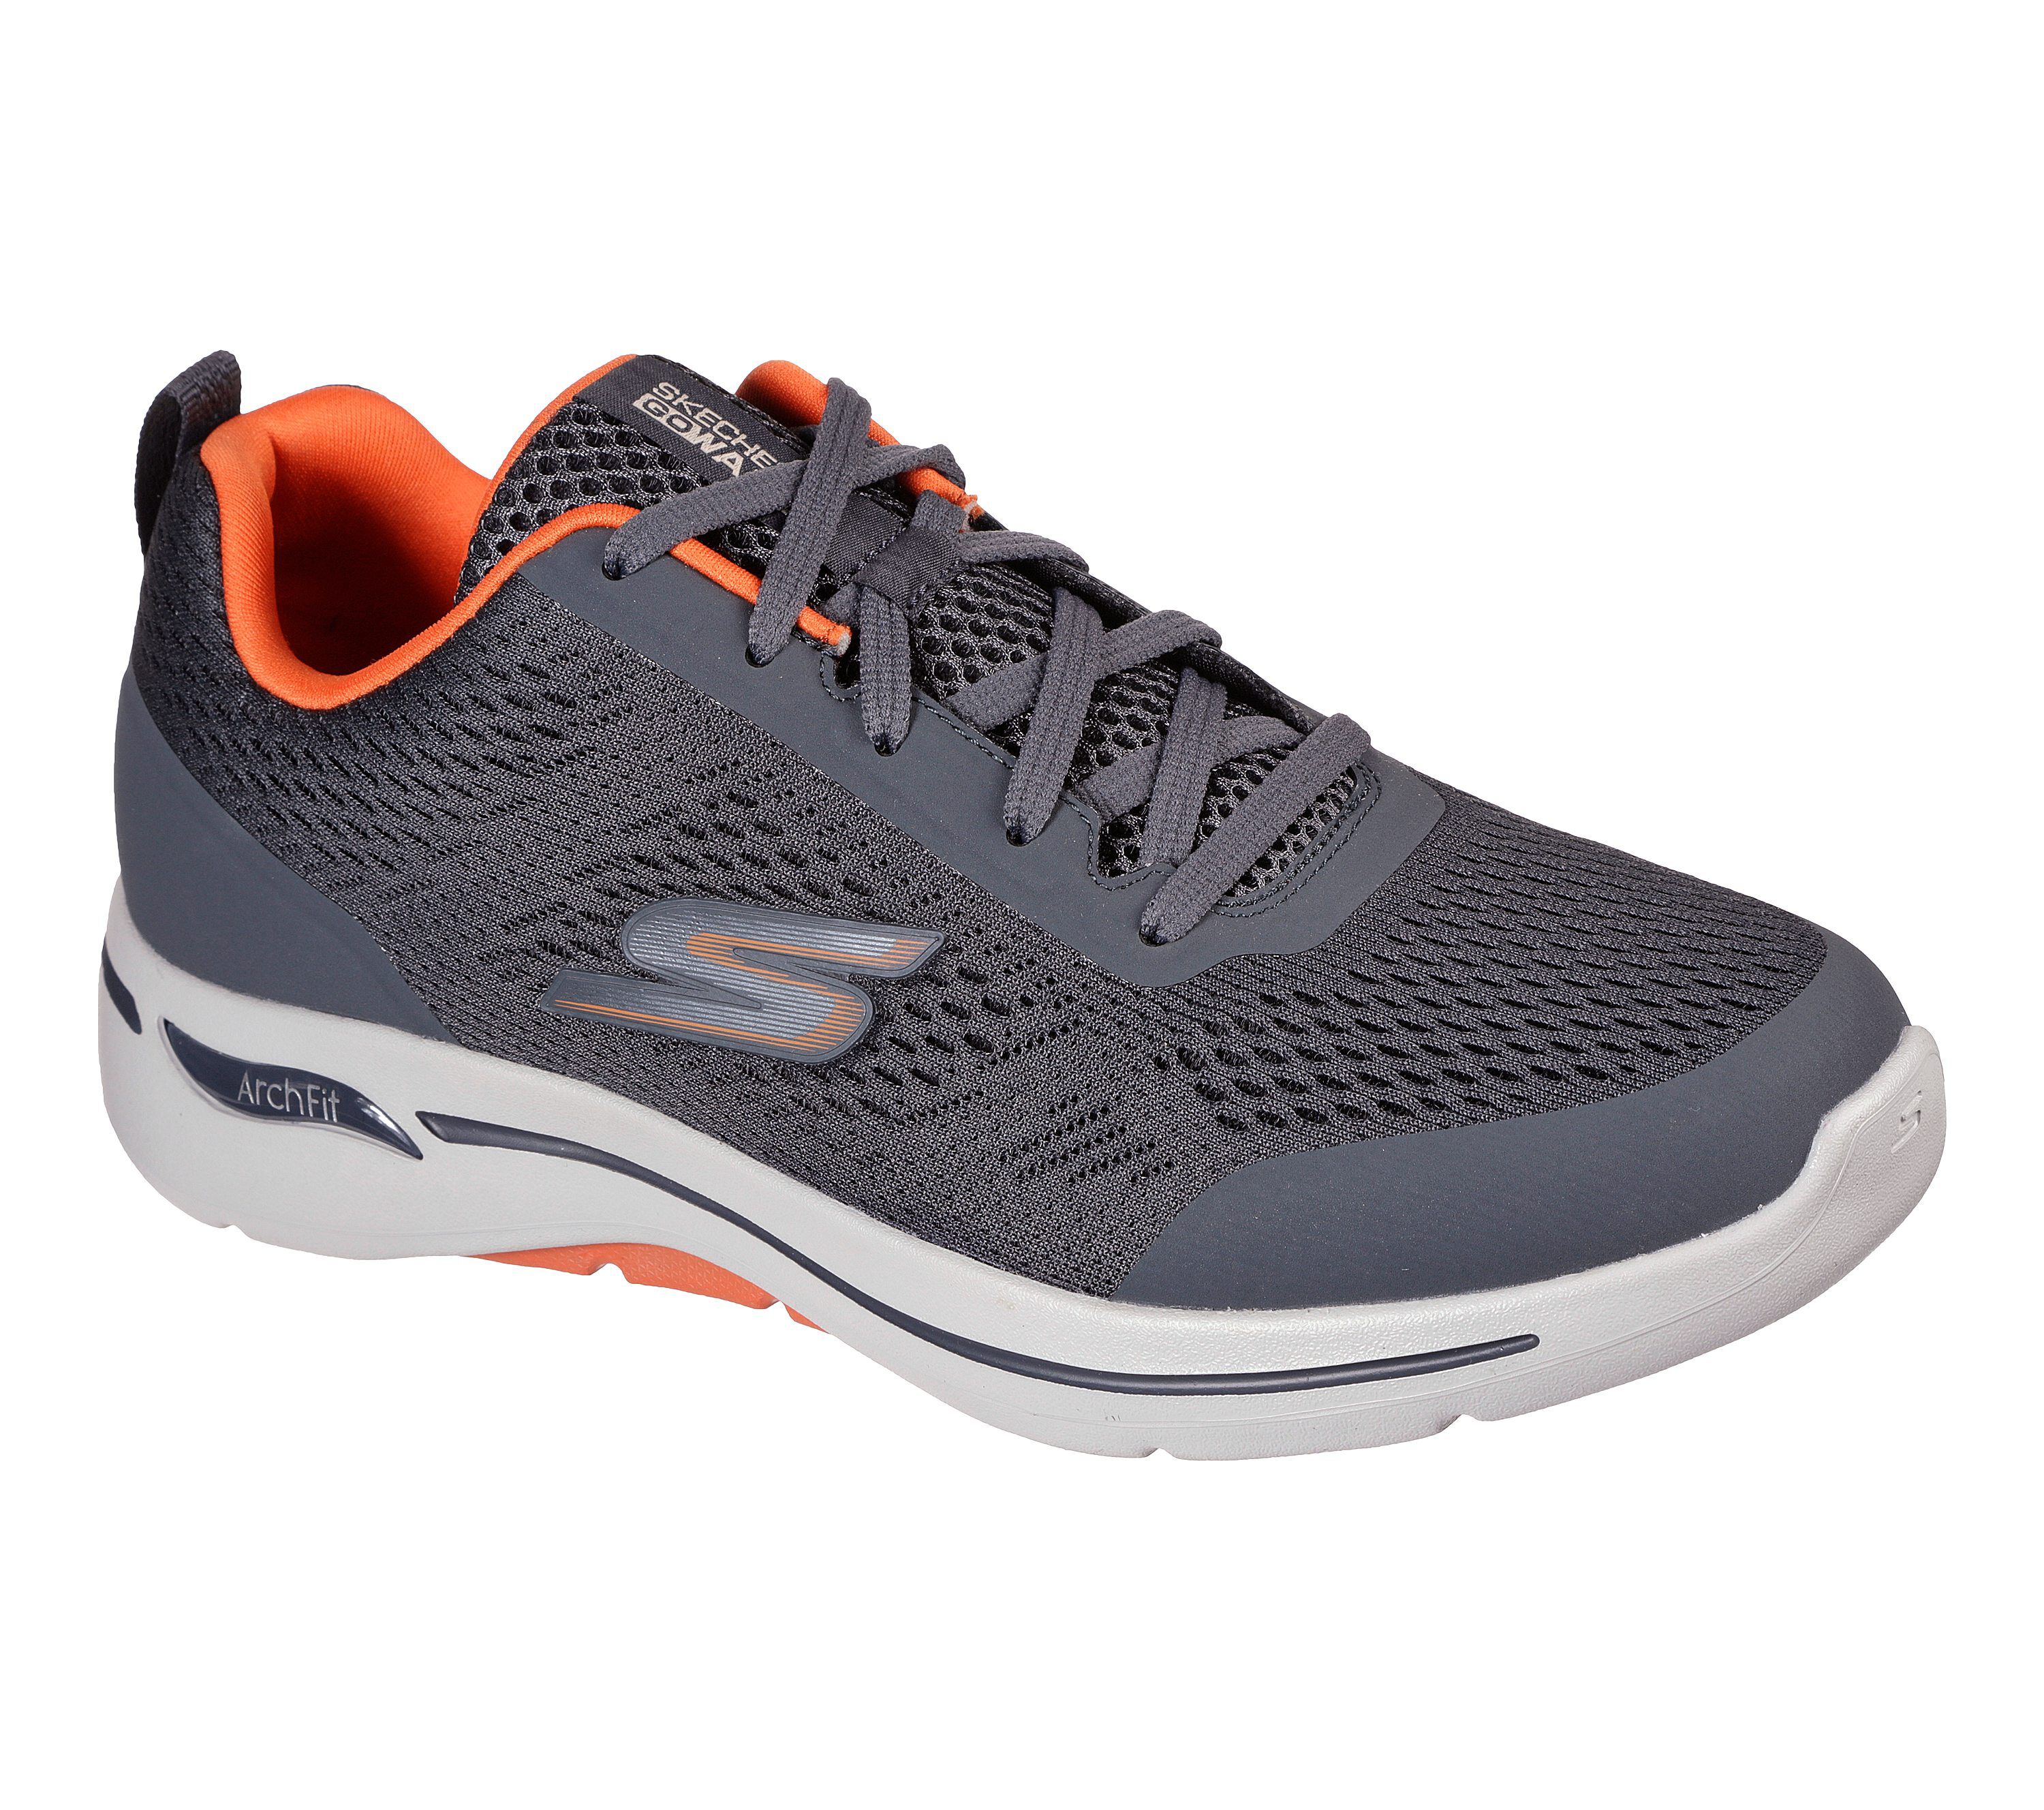 skechers shoes for men india